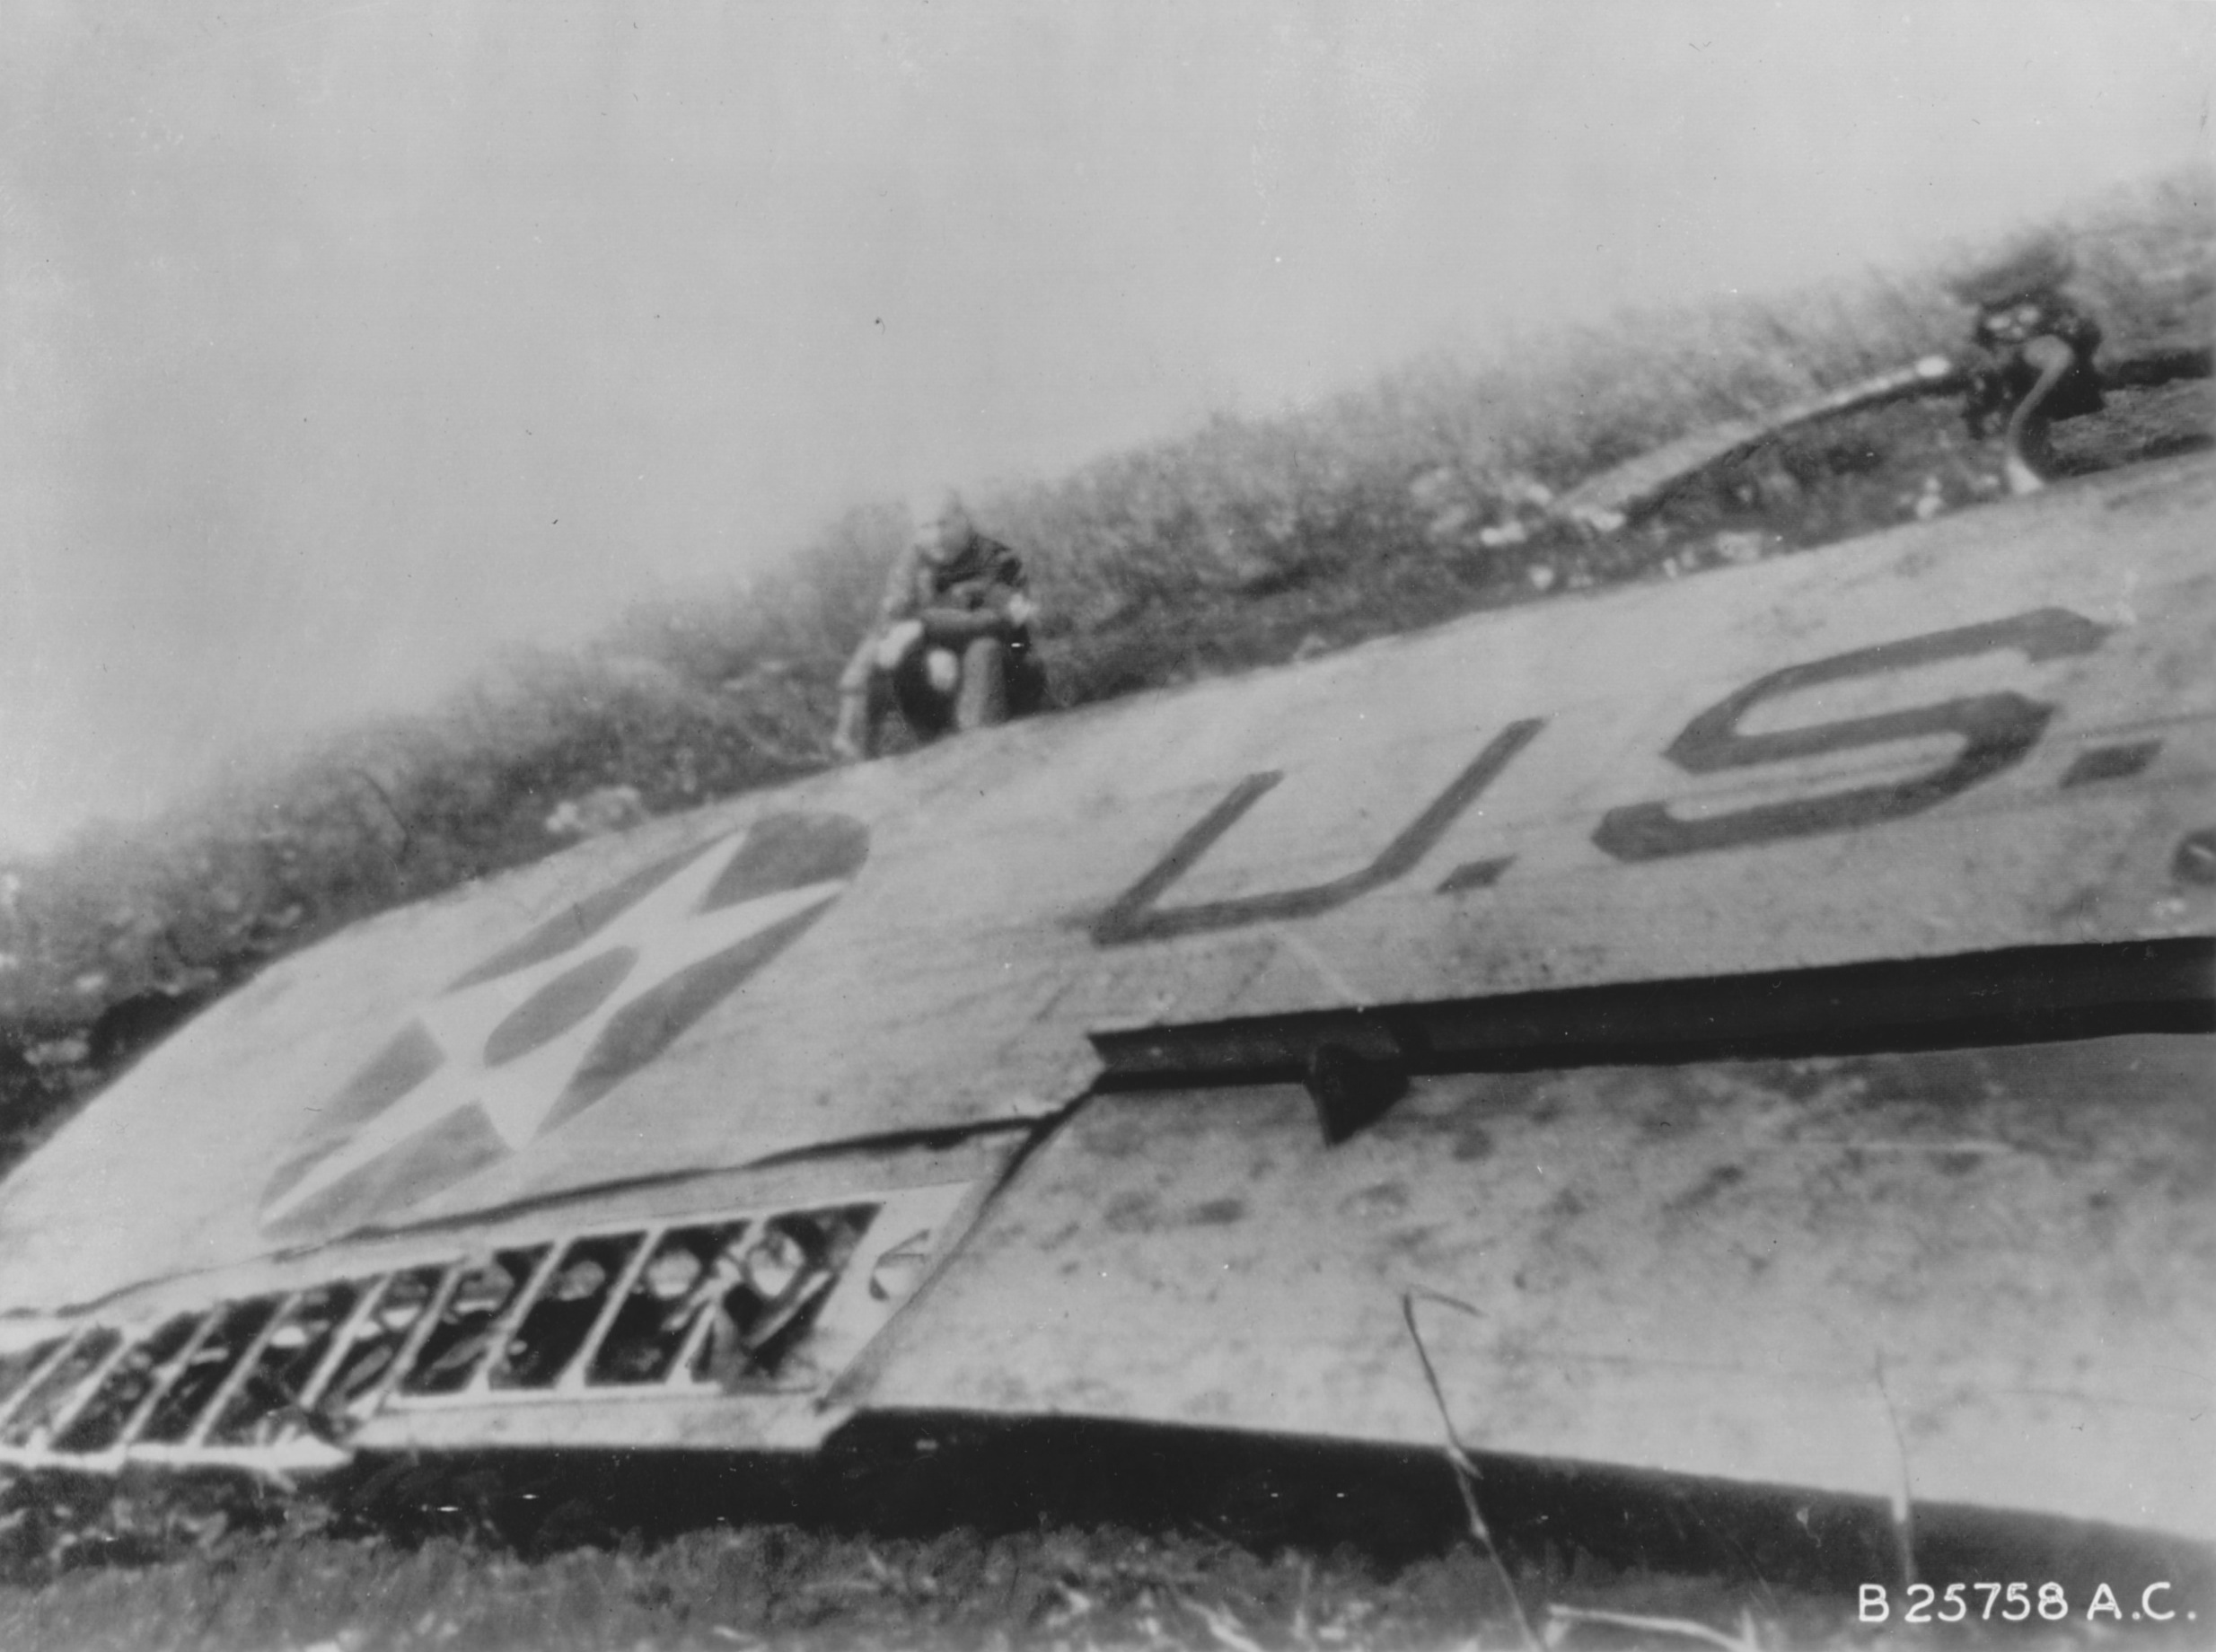 James Doolittle sitting by the wing of his wrecked B-25 Mitchell bomber, China, 18 Apr 1942